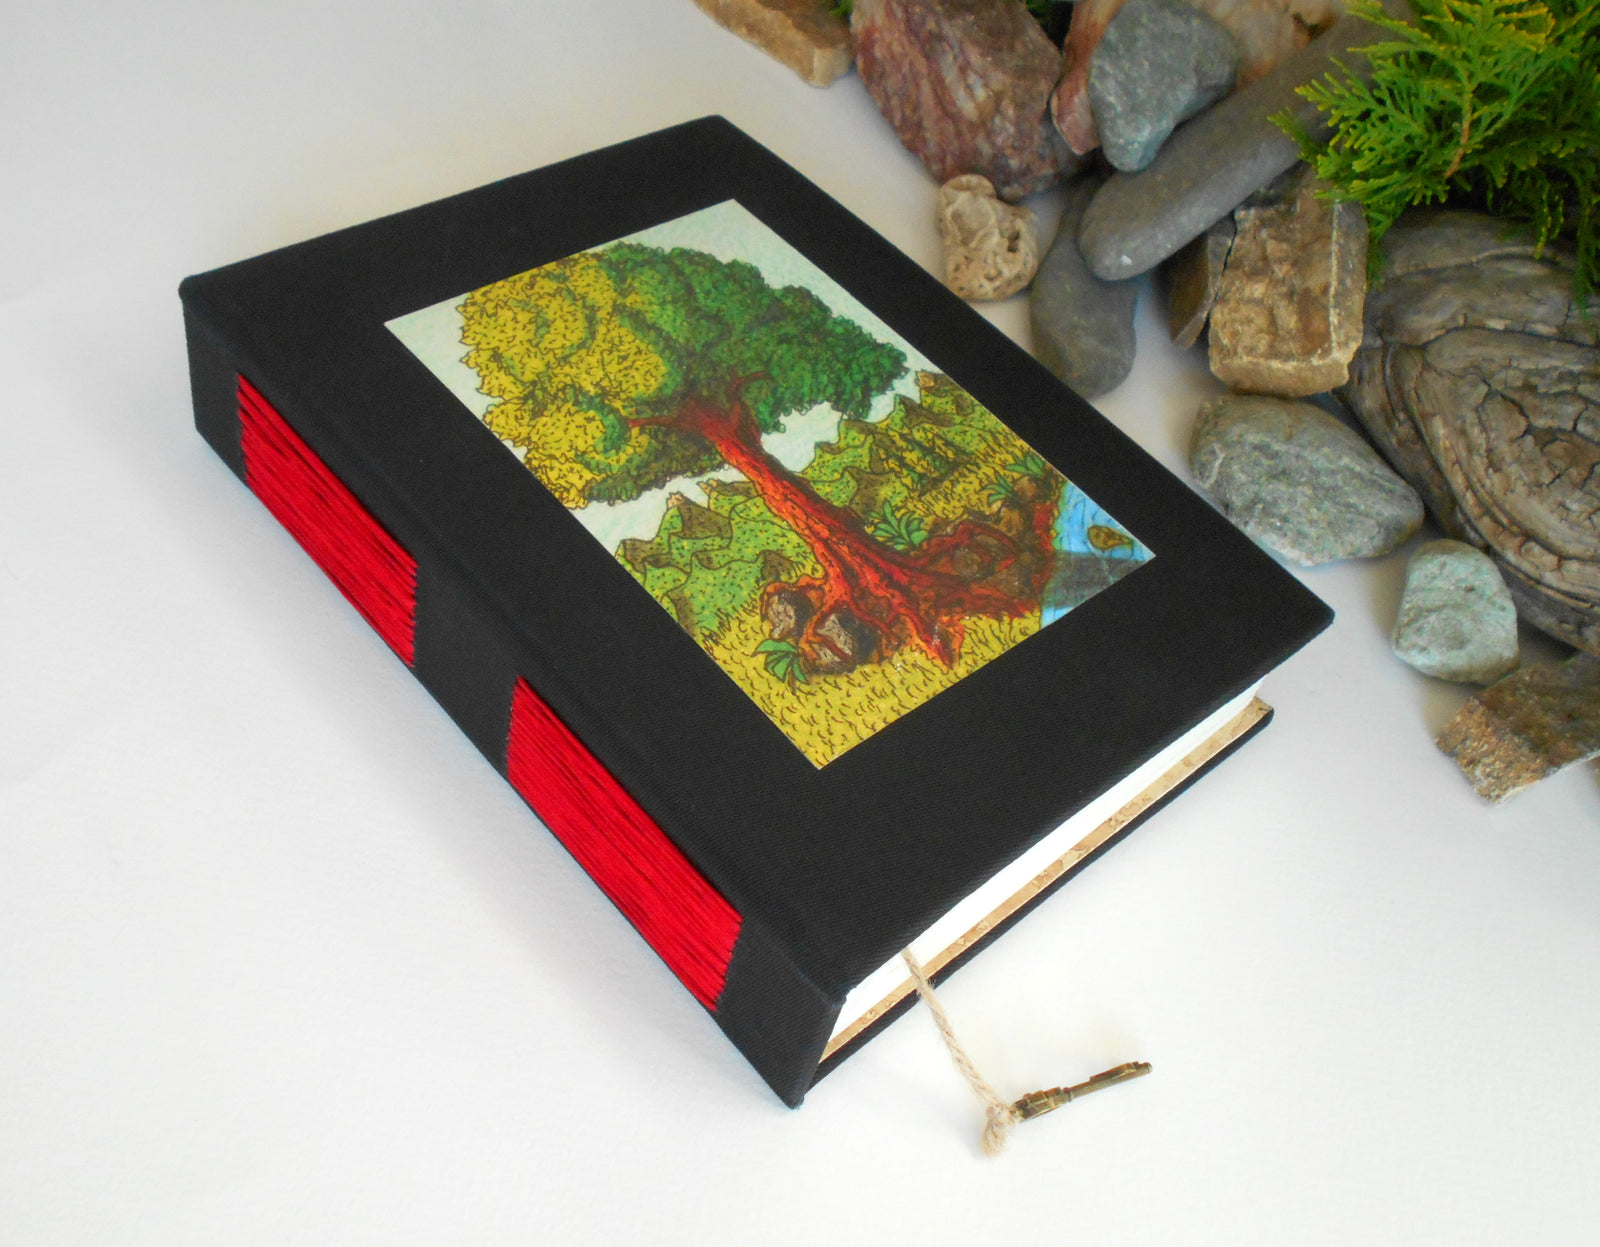 Handmade fabric sketchbook journal with a space fantasy art